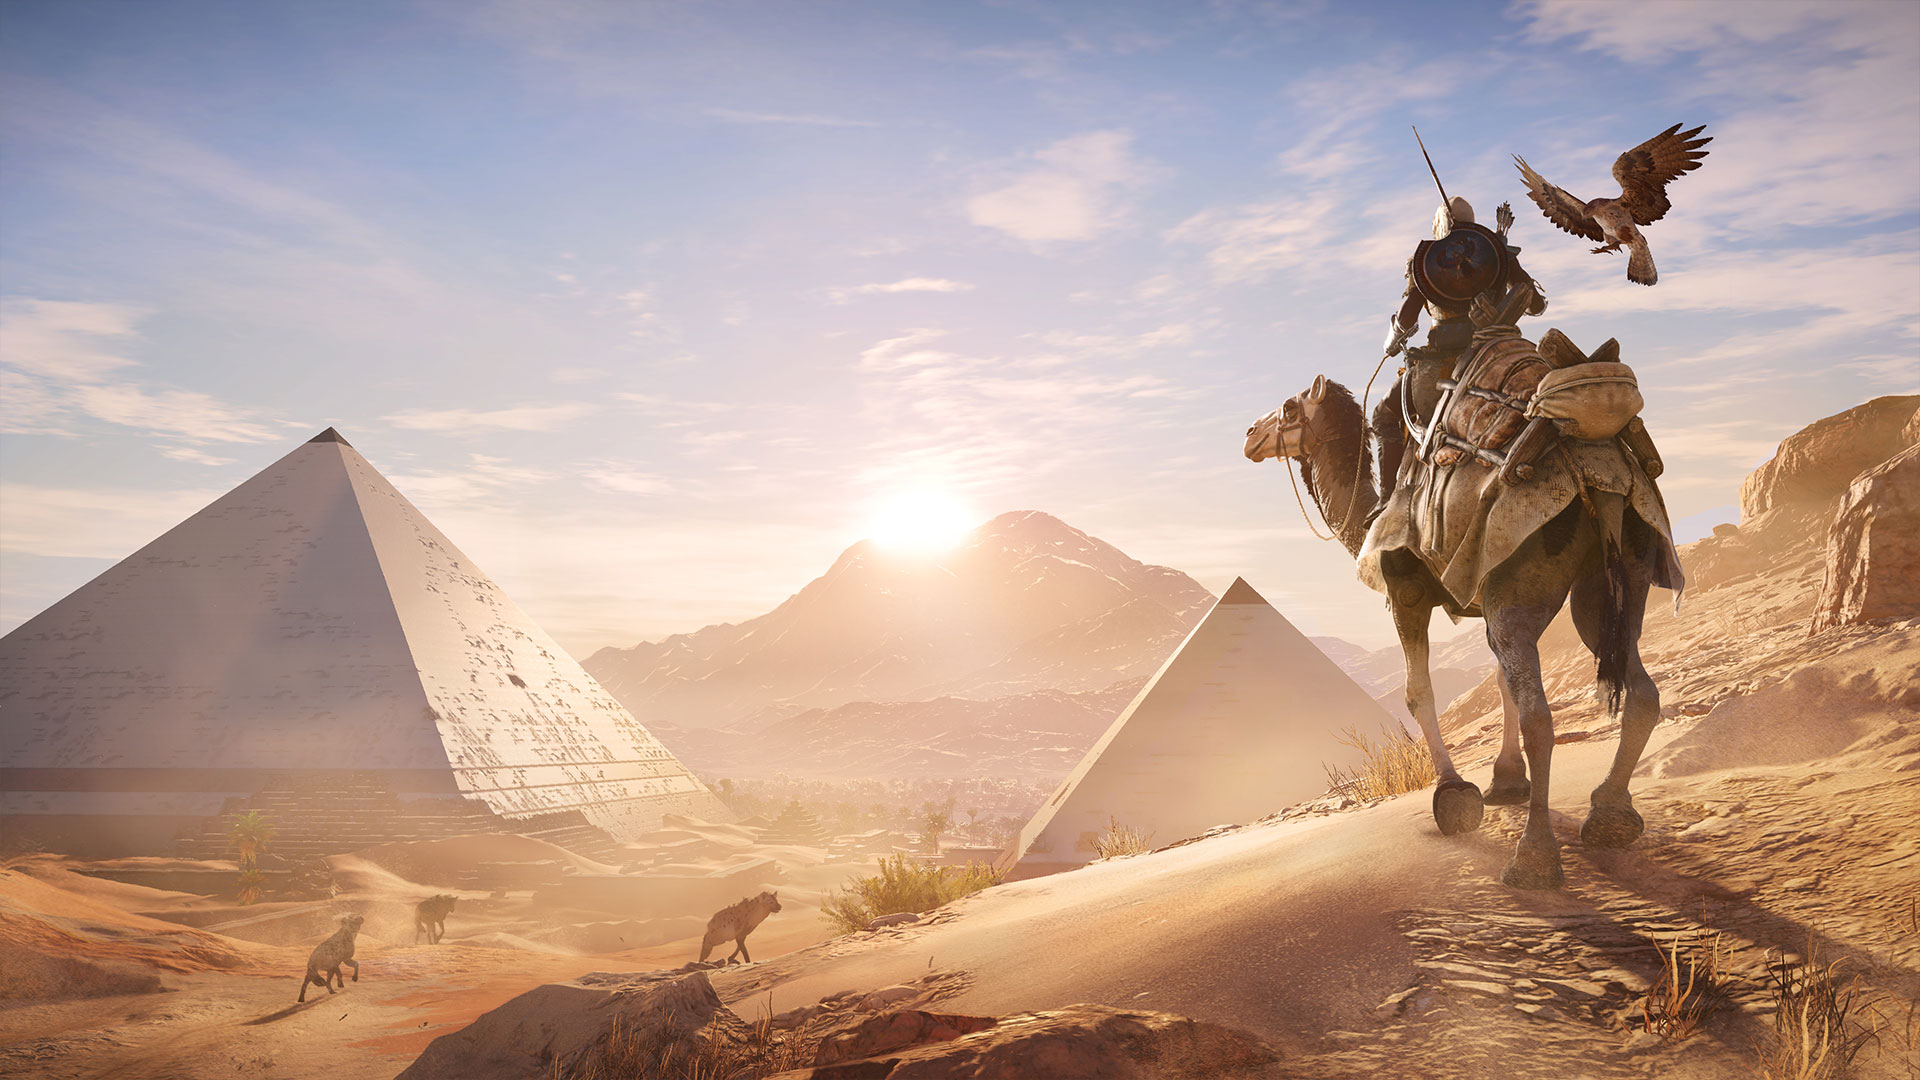 Assassin's Creed Origins Trailer Showcases Ancient Egypt in Decline